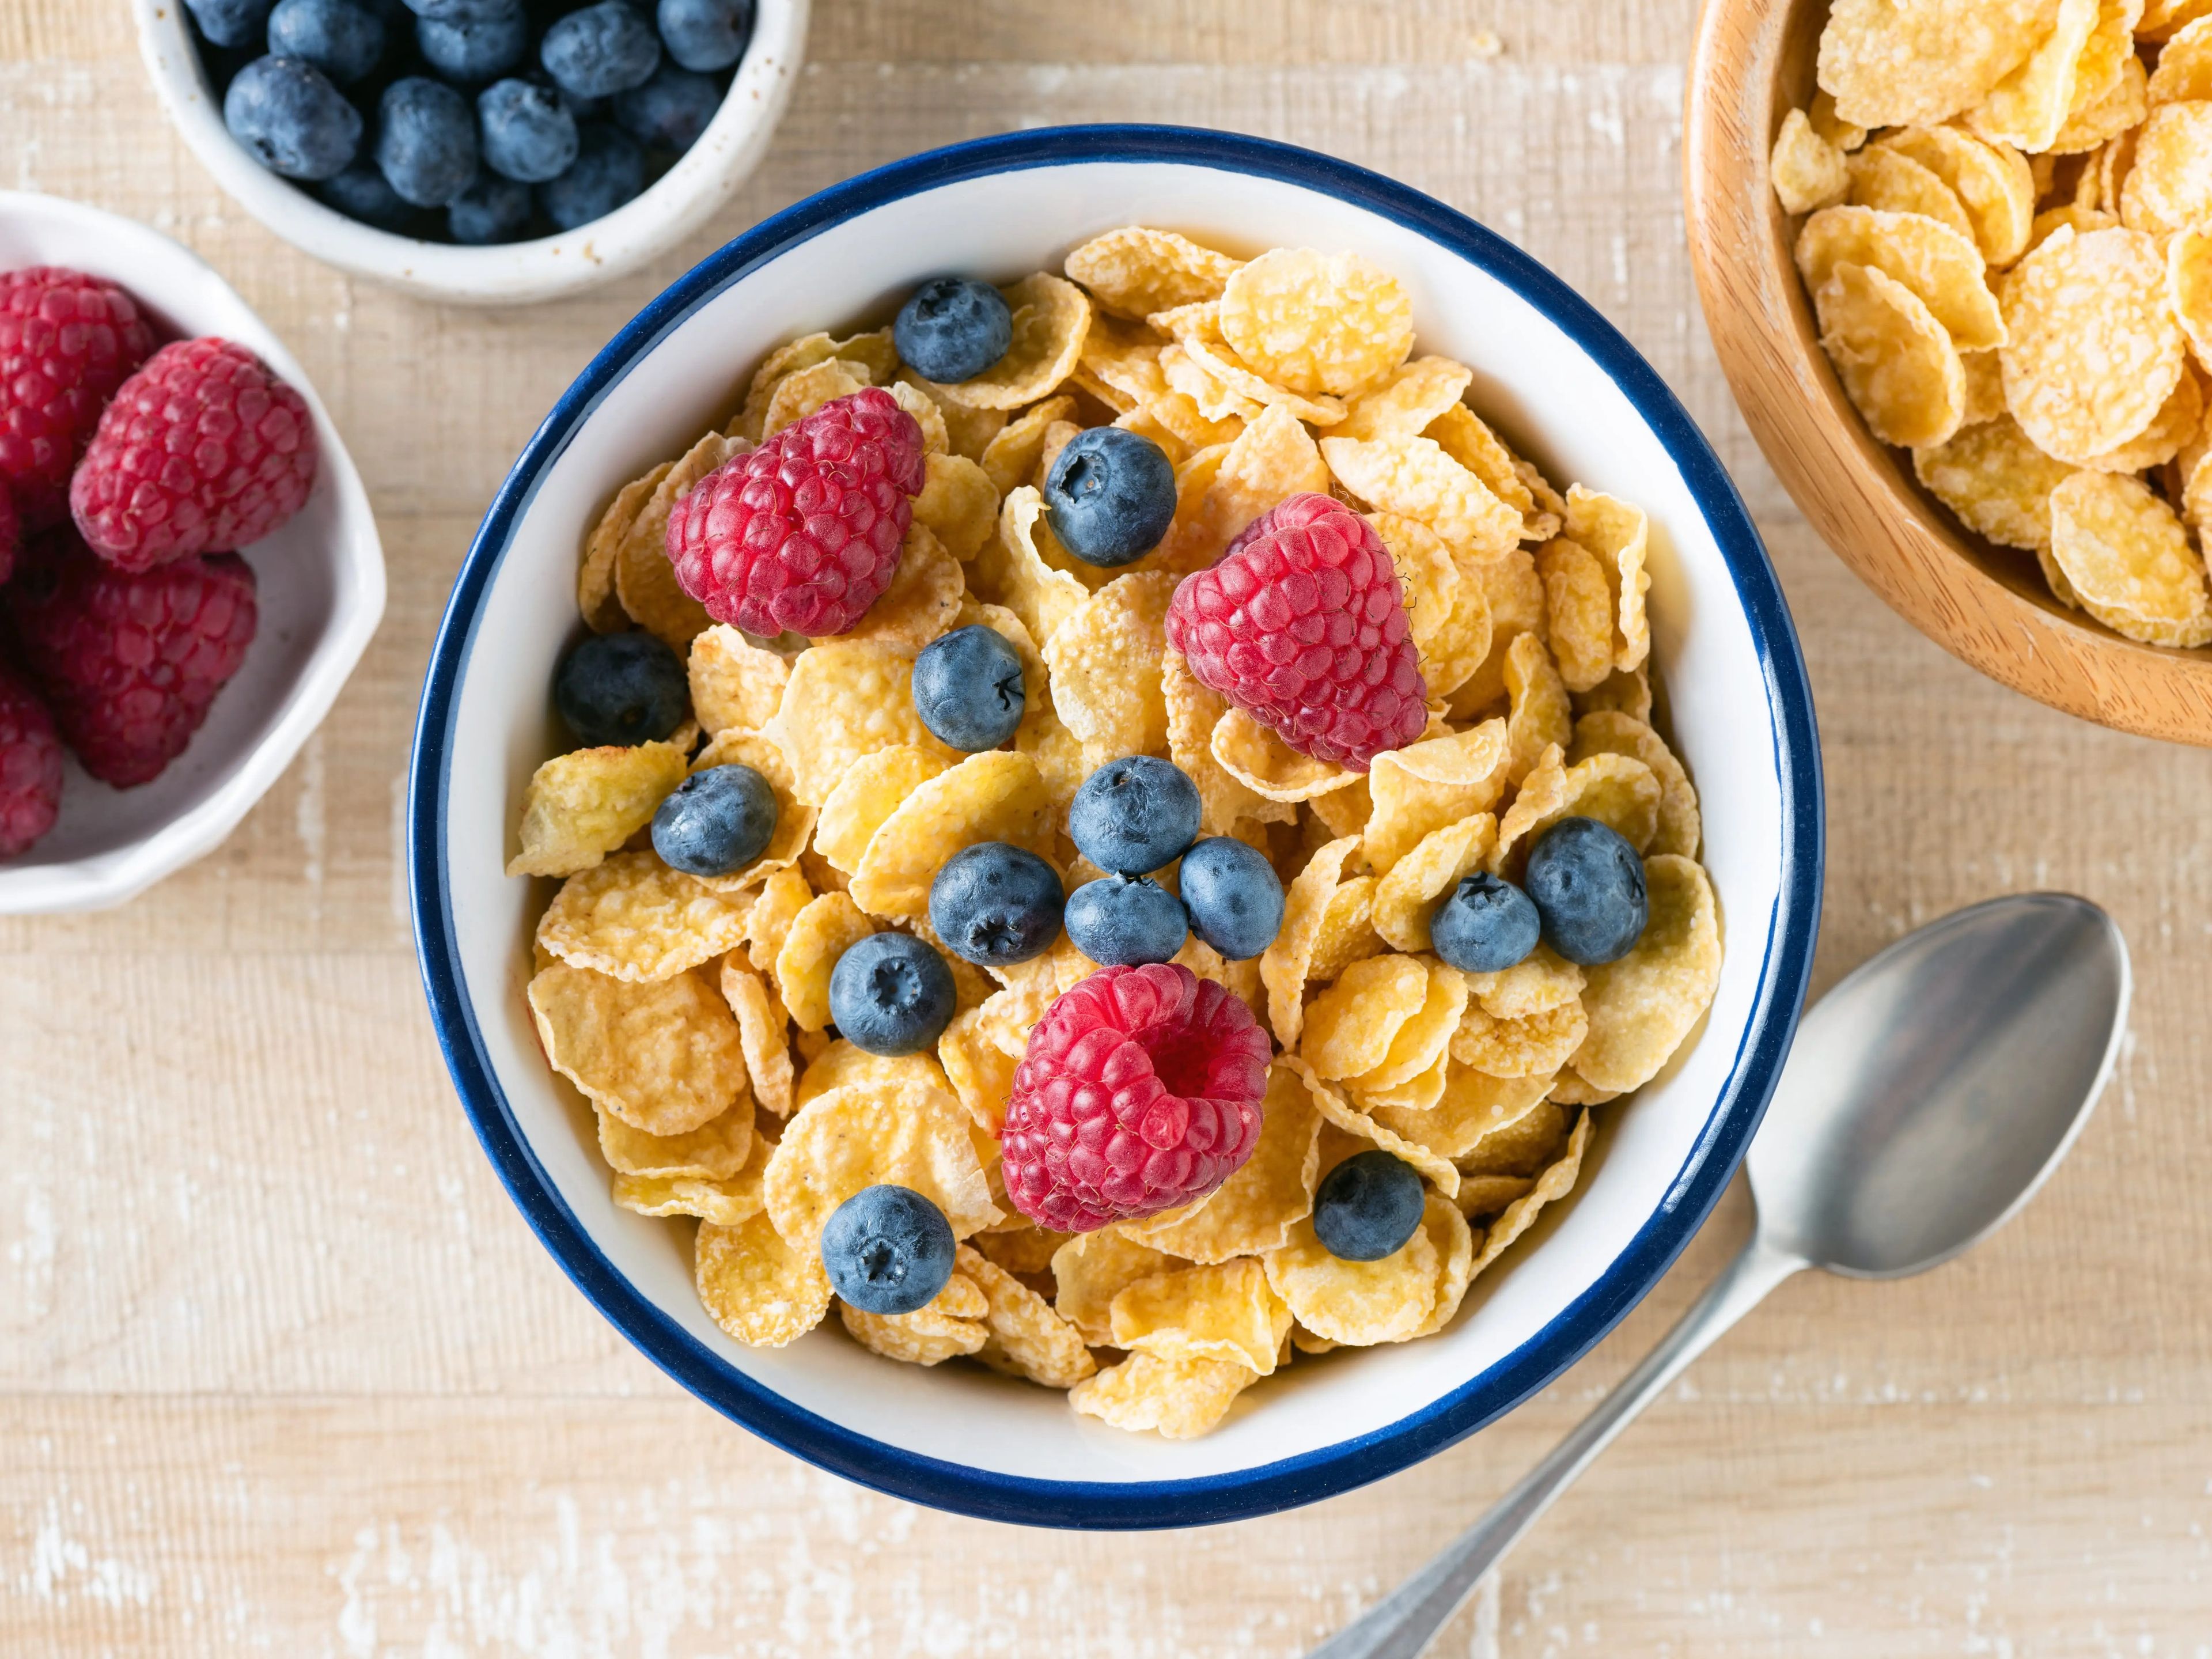 Corn flakes with berries